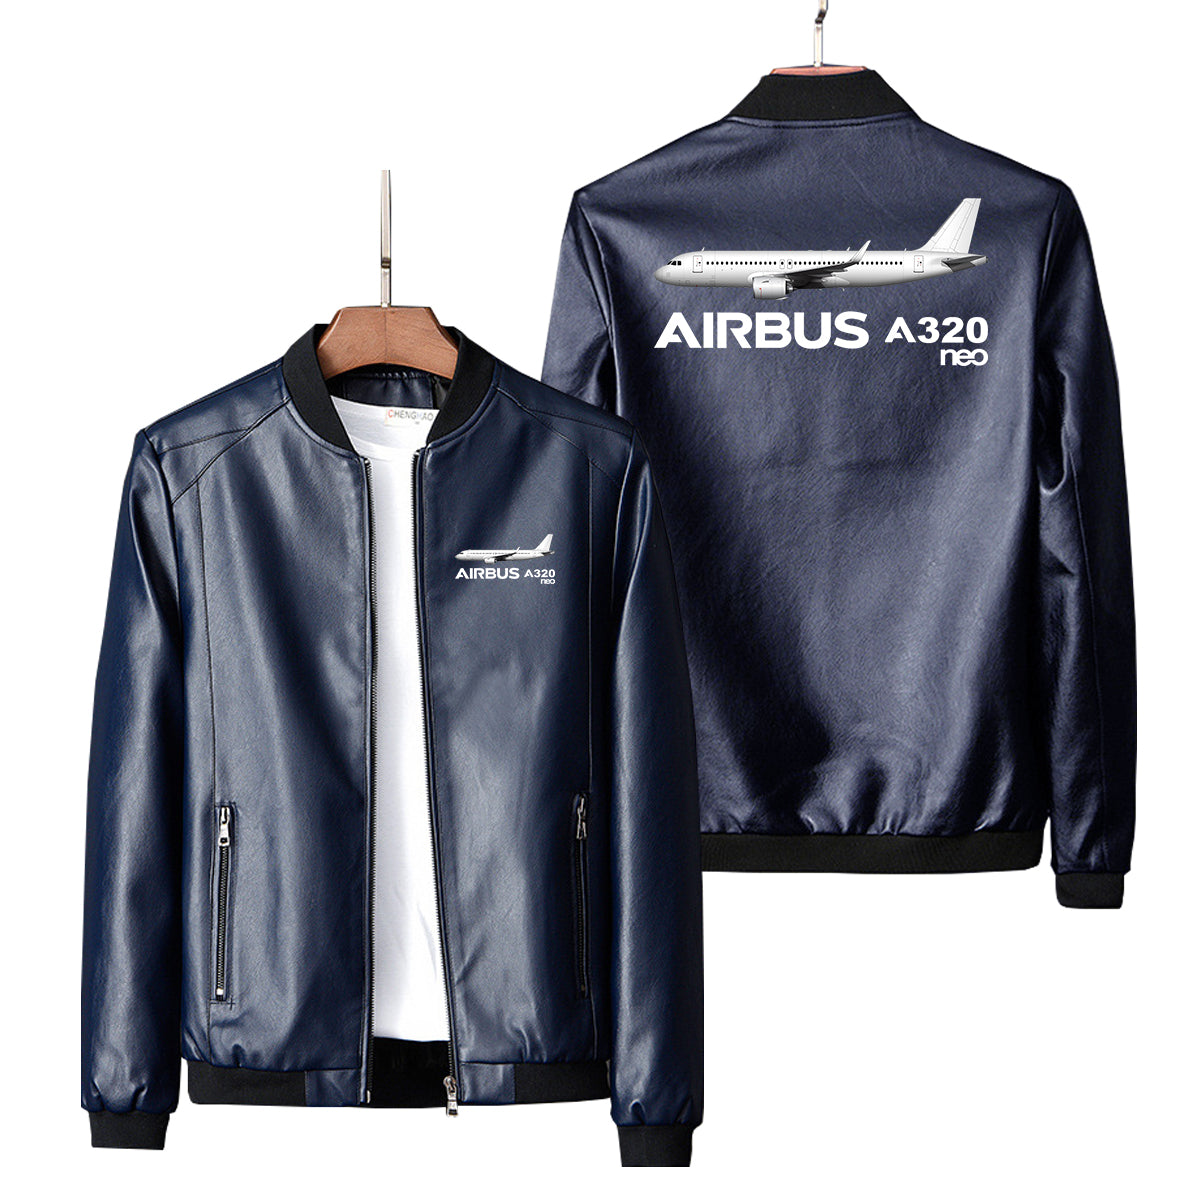 The Airbus A320Neo Designed PU Leather Jackets